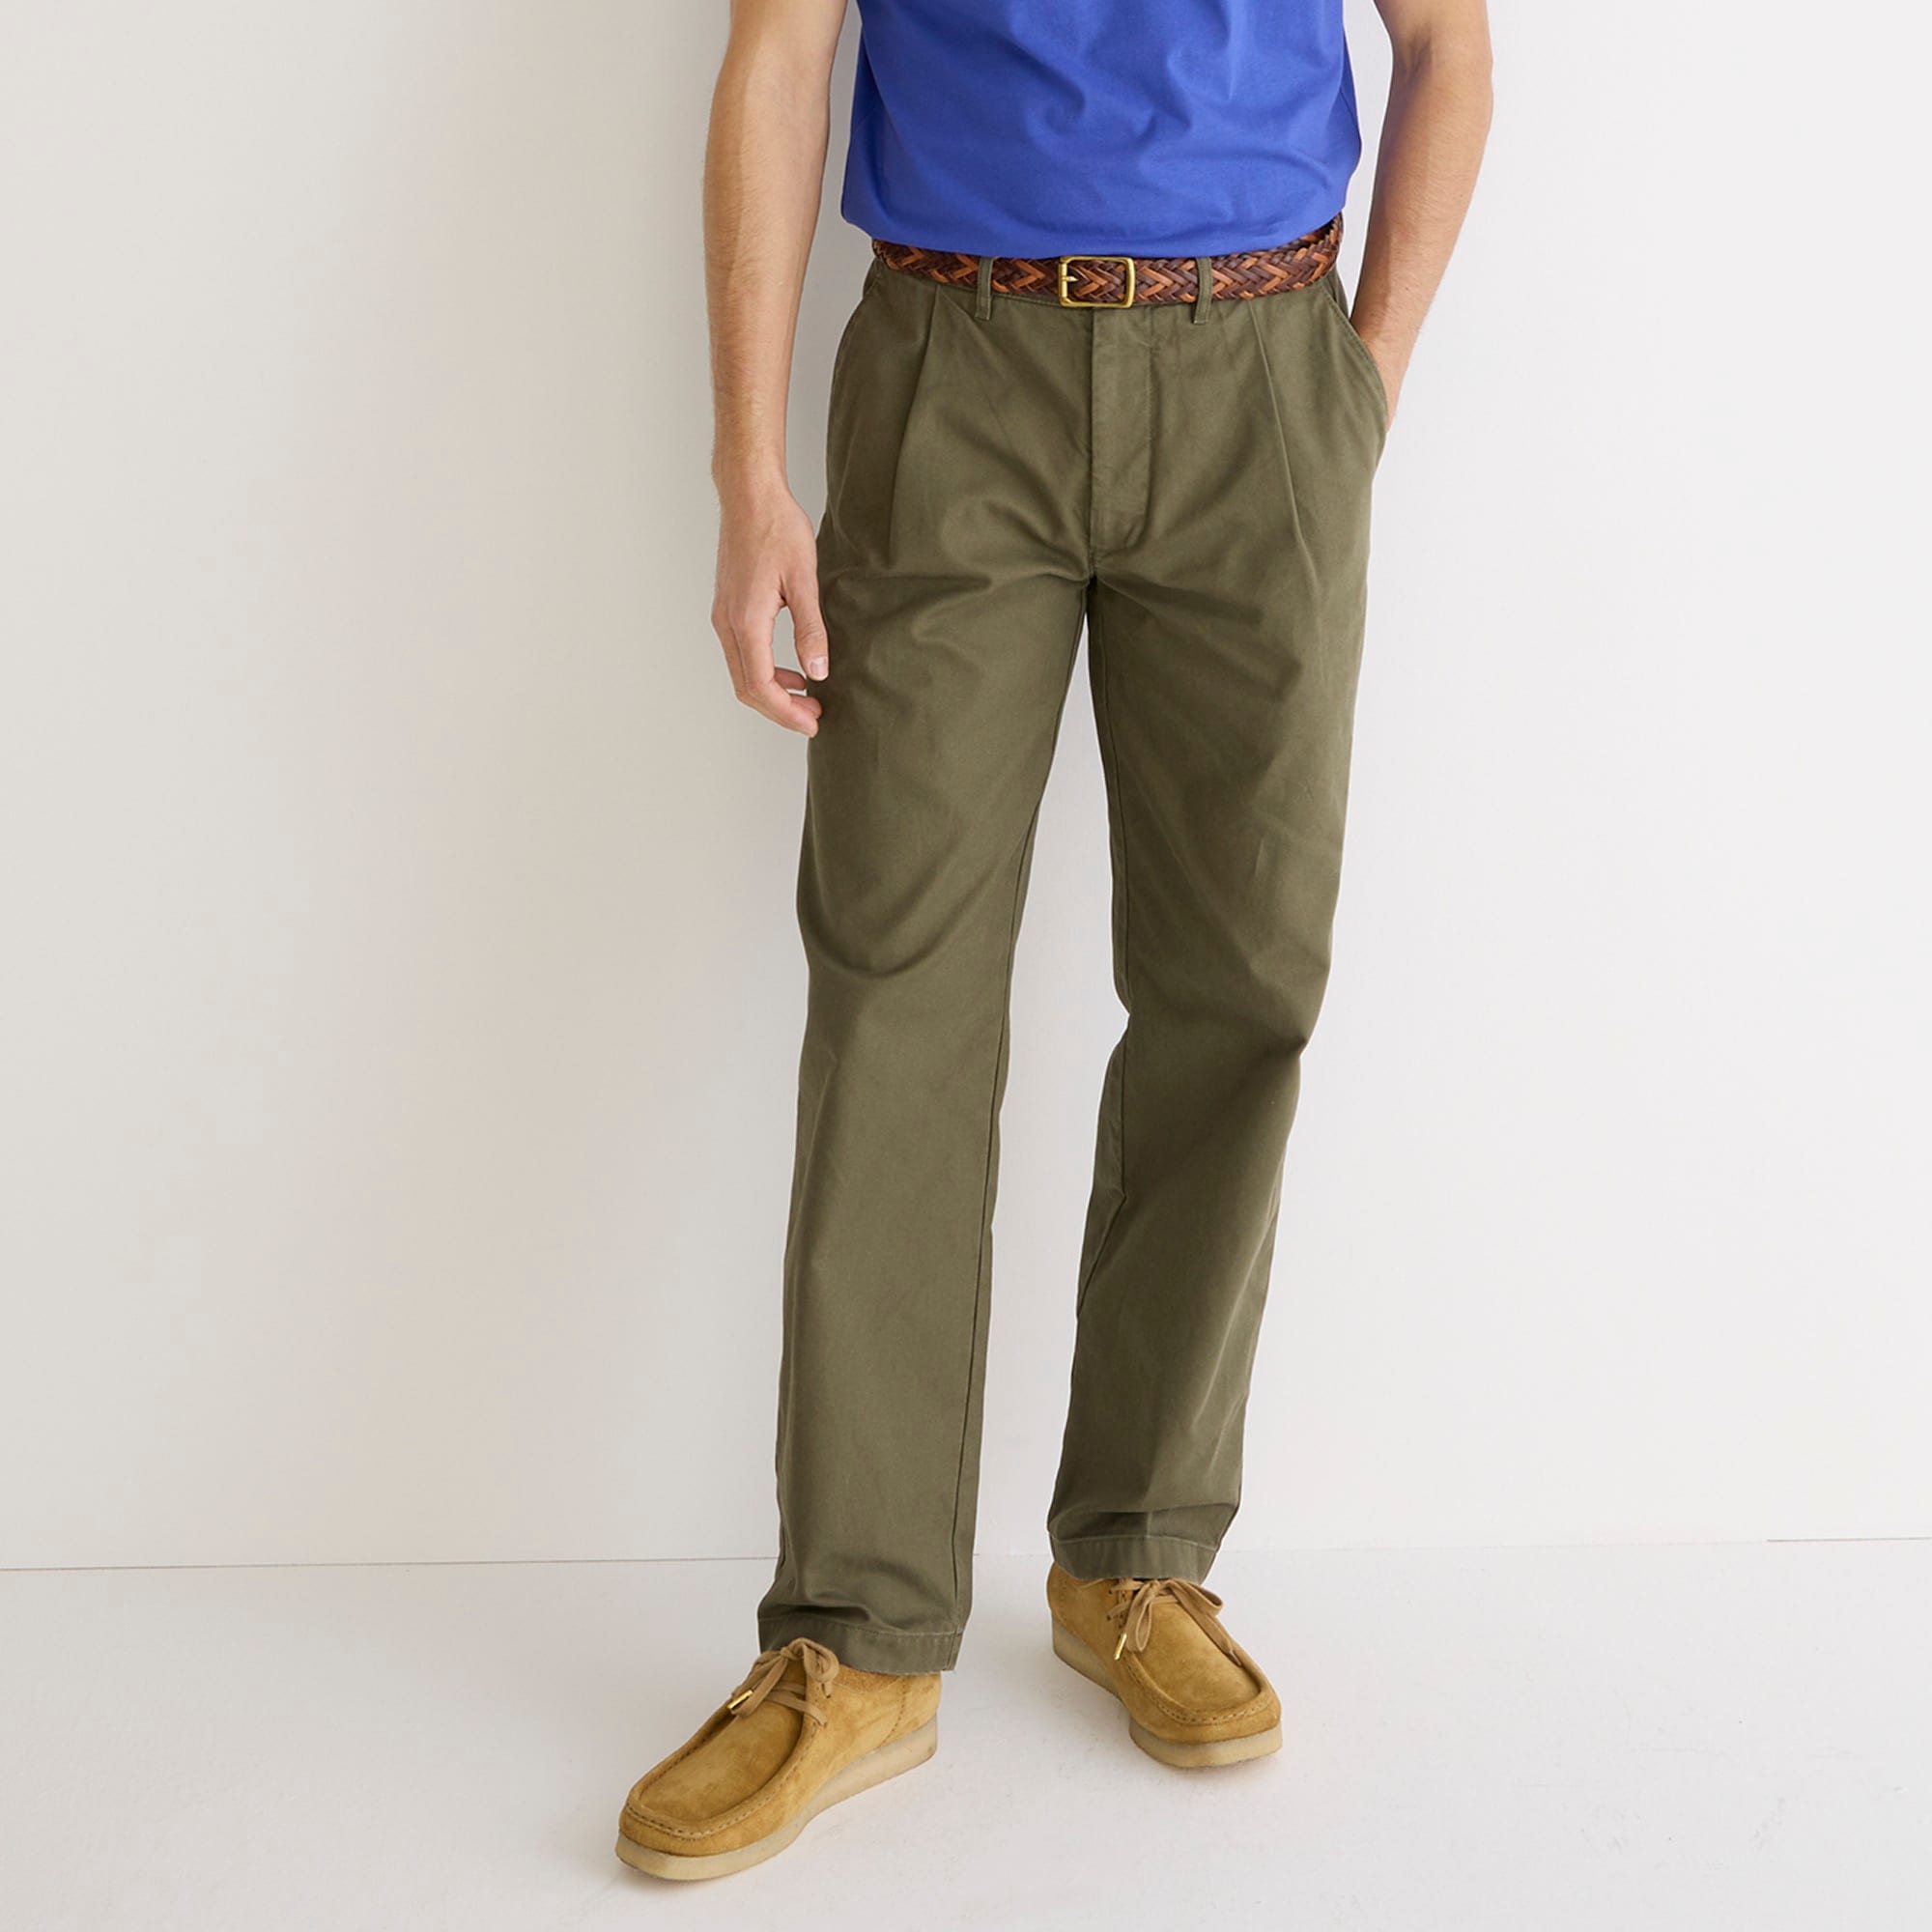 Jcrew Classic Relaxed-fit pleated chino pant